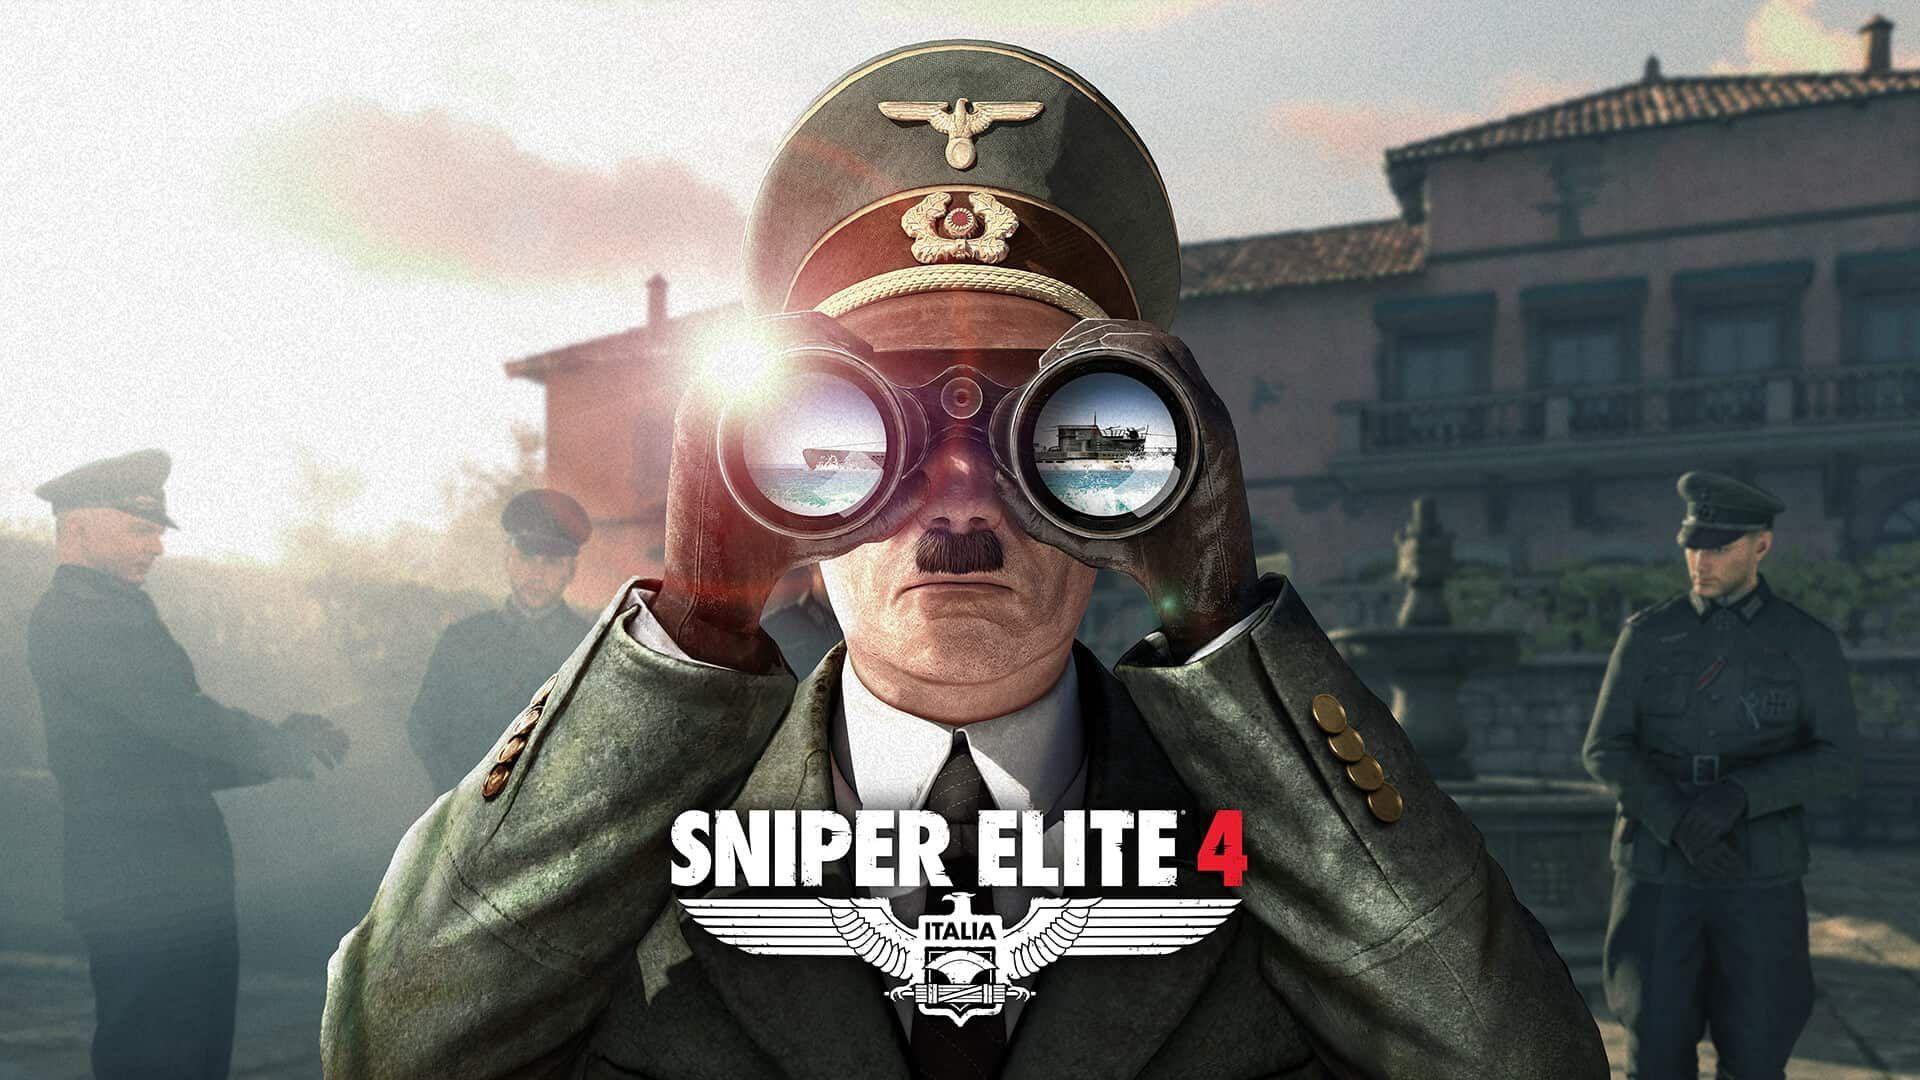 Sniper Elite 4 Is The Latest Edition Of The Familiar Third Person